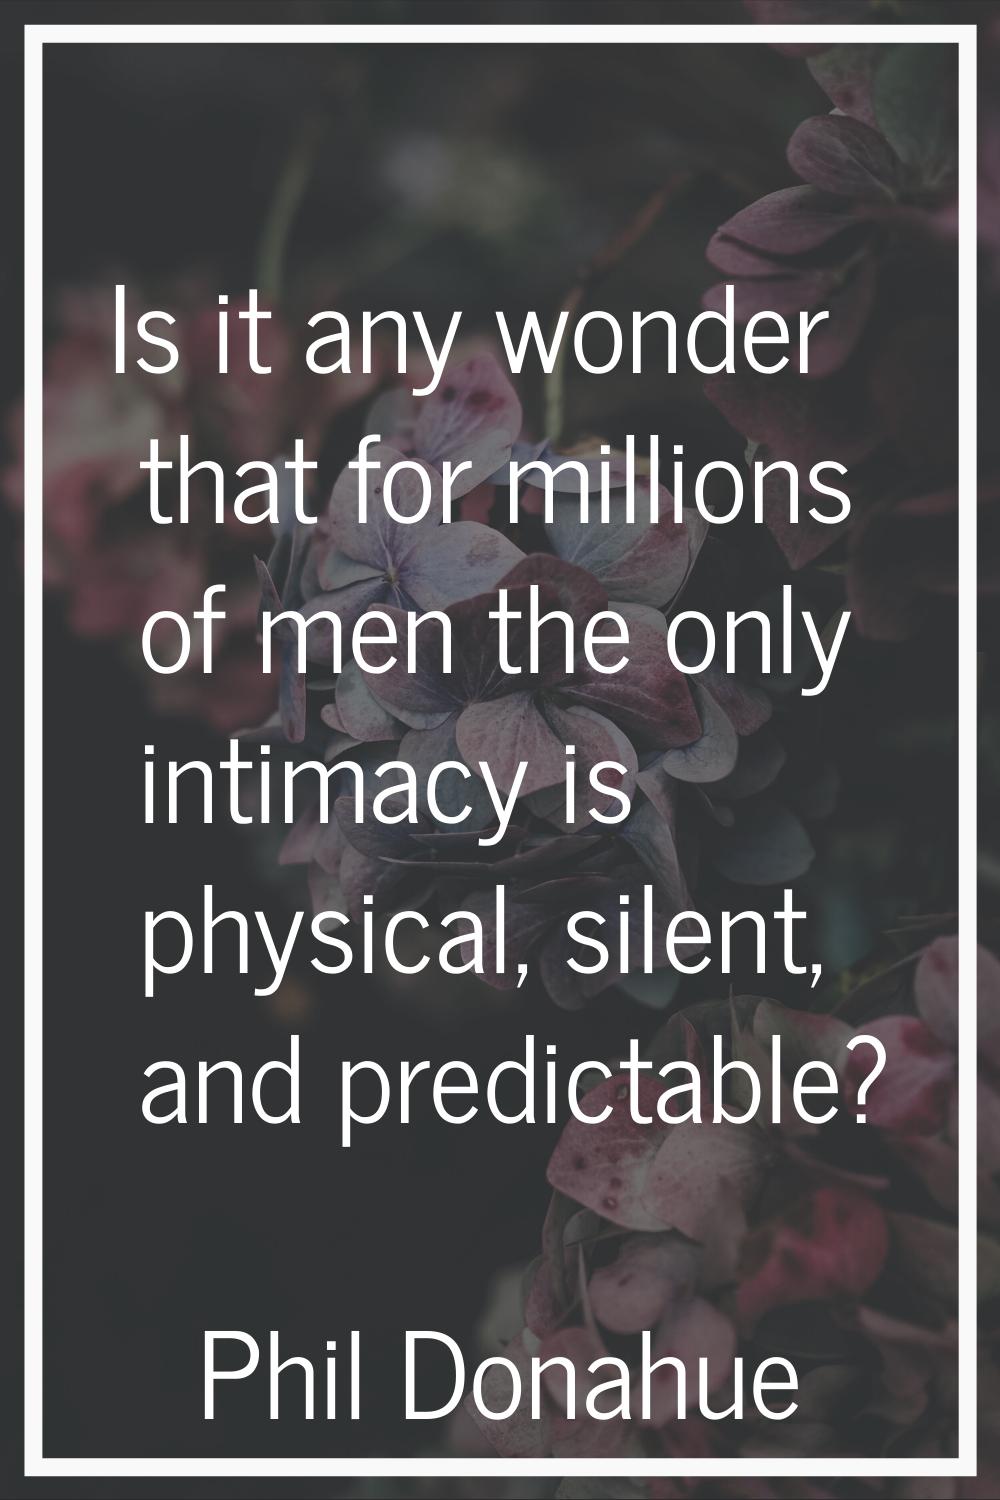 Is it any wonder that for millions of men the only intimacy is physical, silent, and predictable?